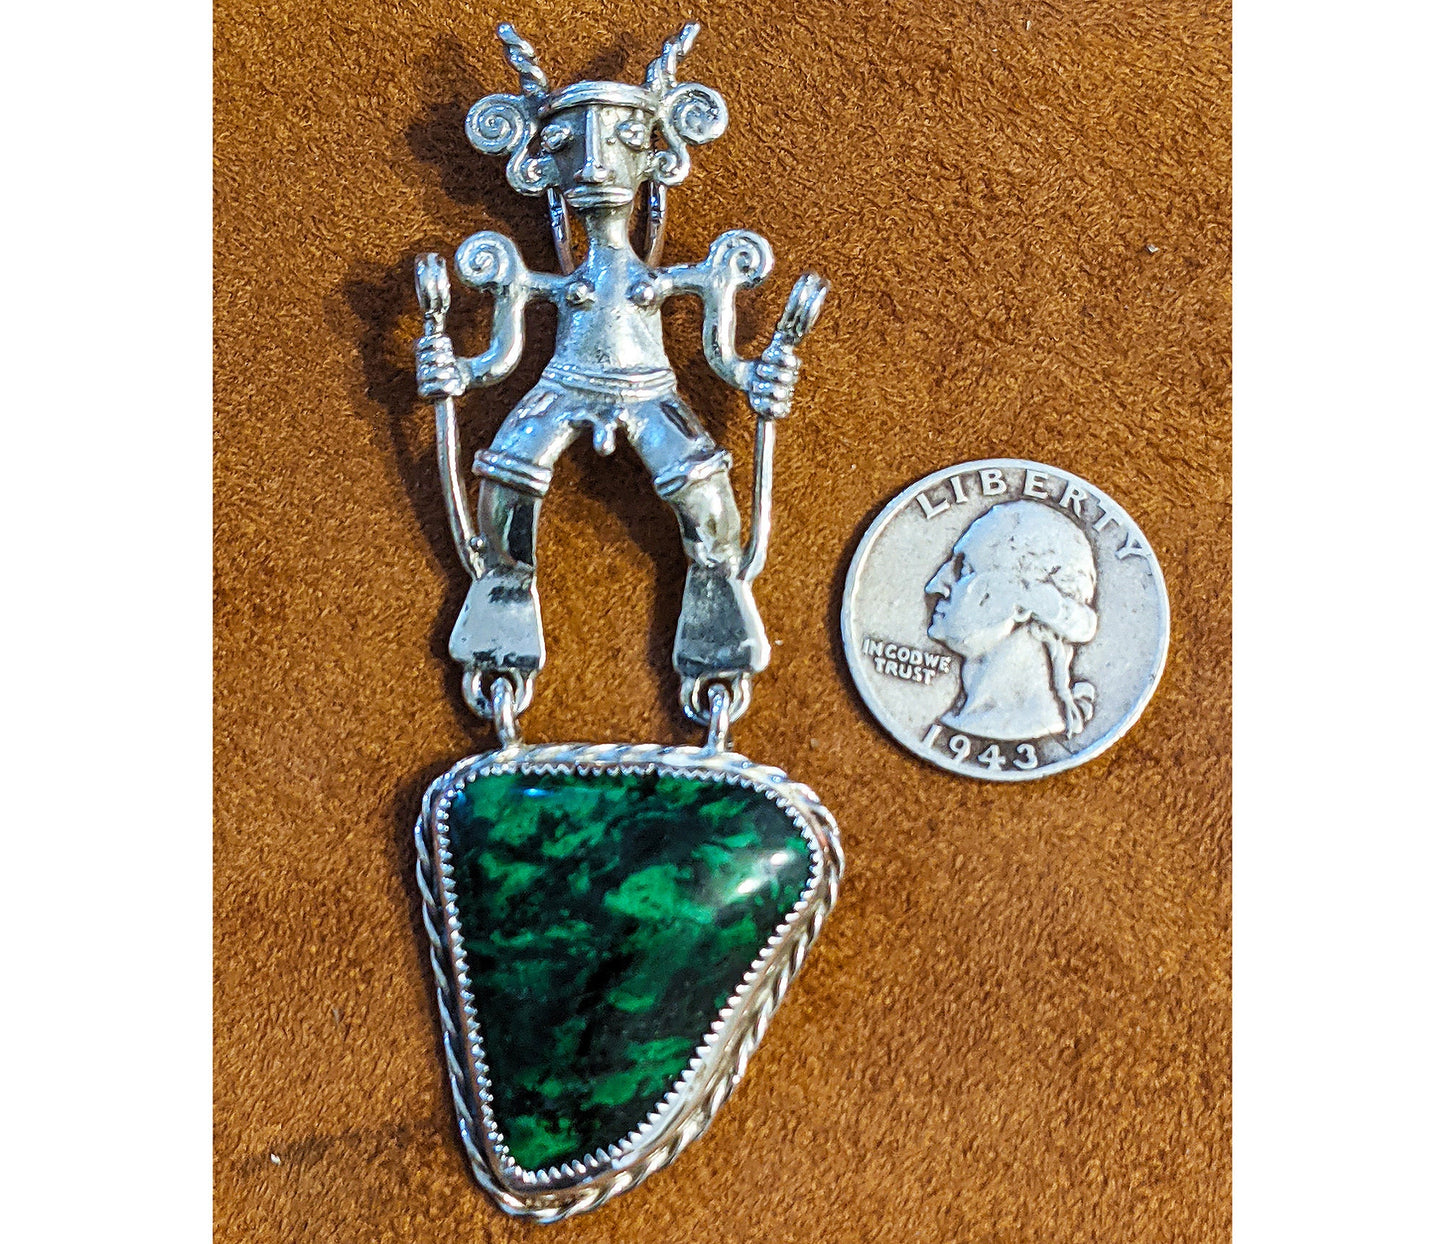 Ode to Shamanism - A magnificent, rich Maw Sit Sit gem with a vintage African Sterling Silver figurine